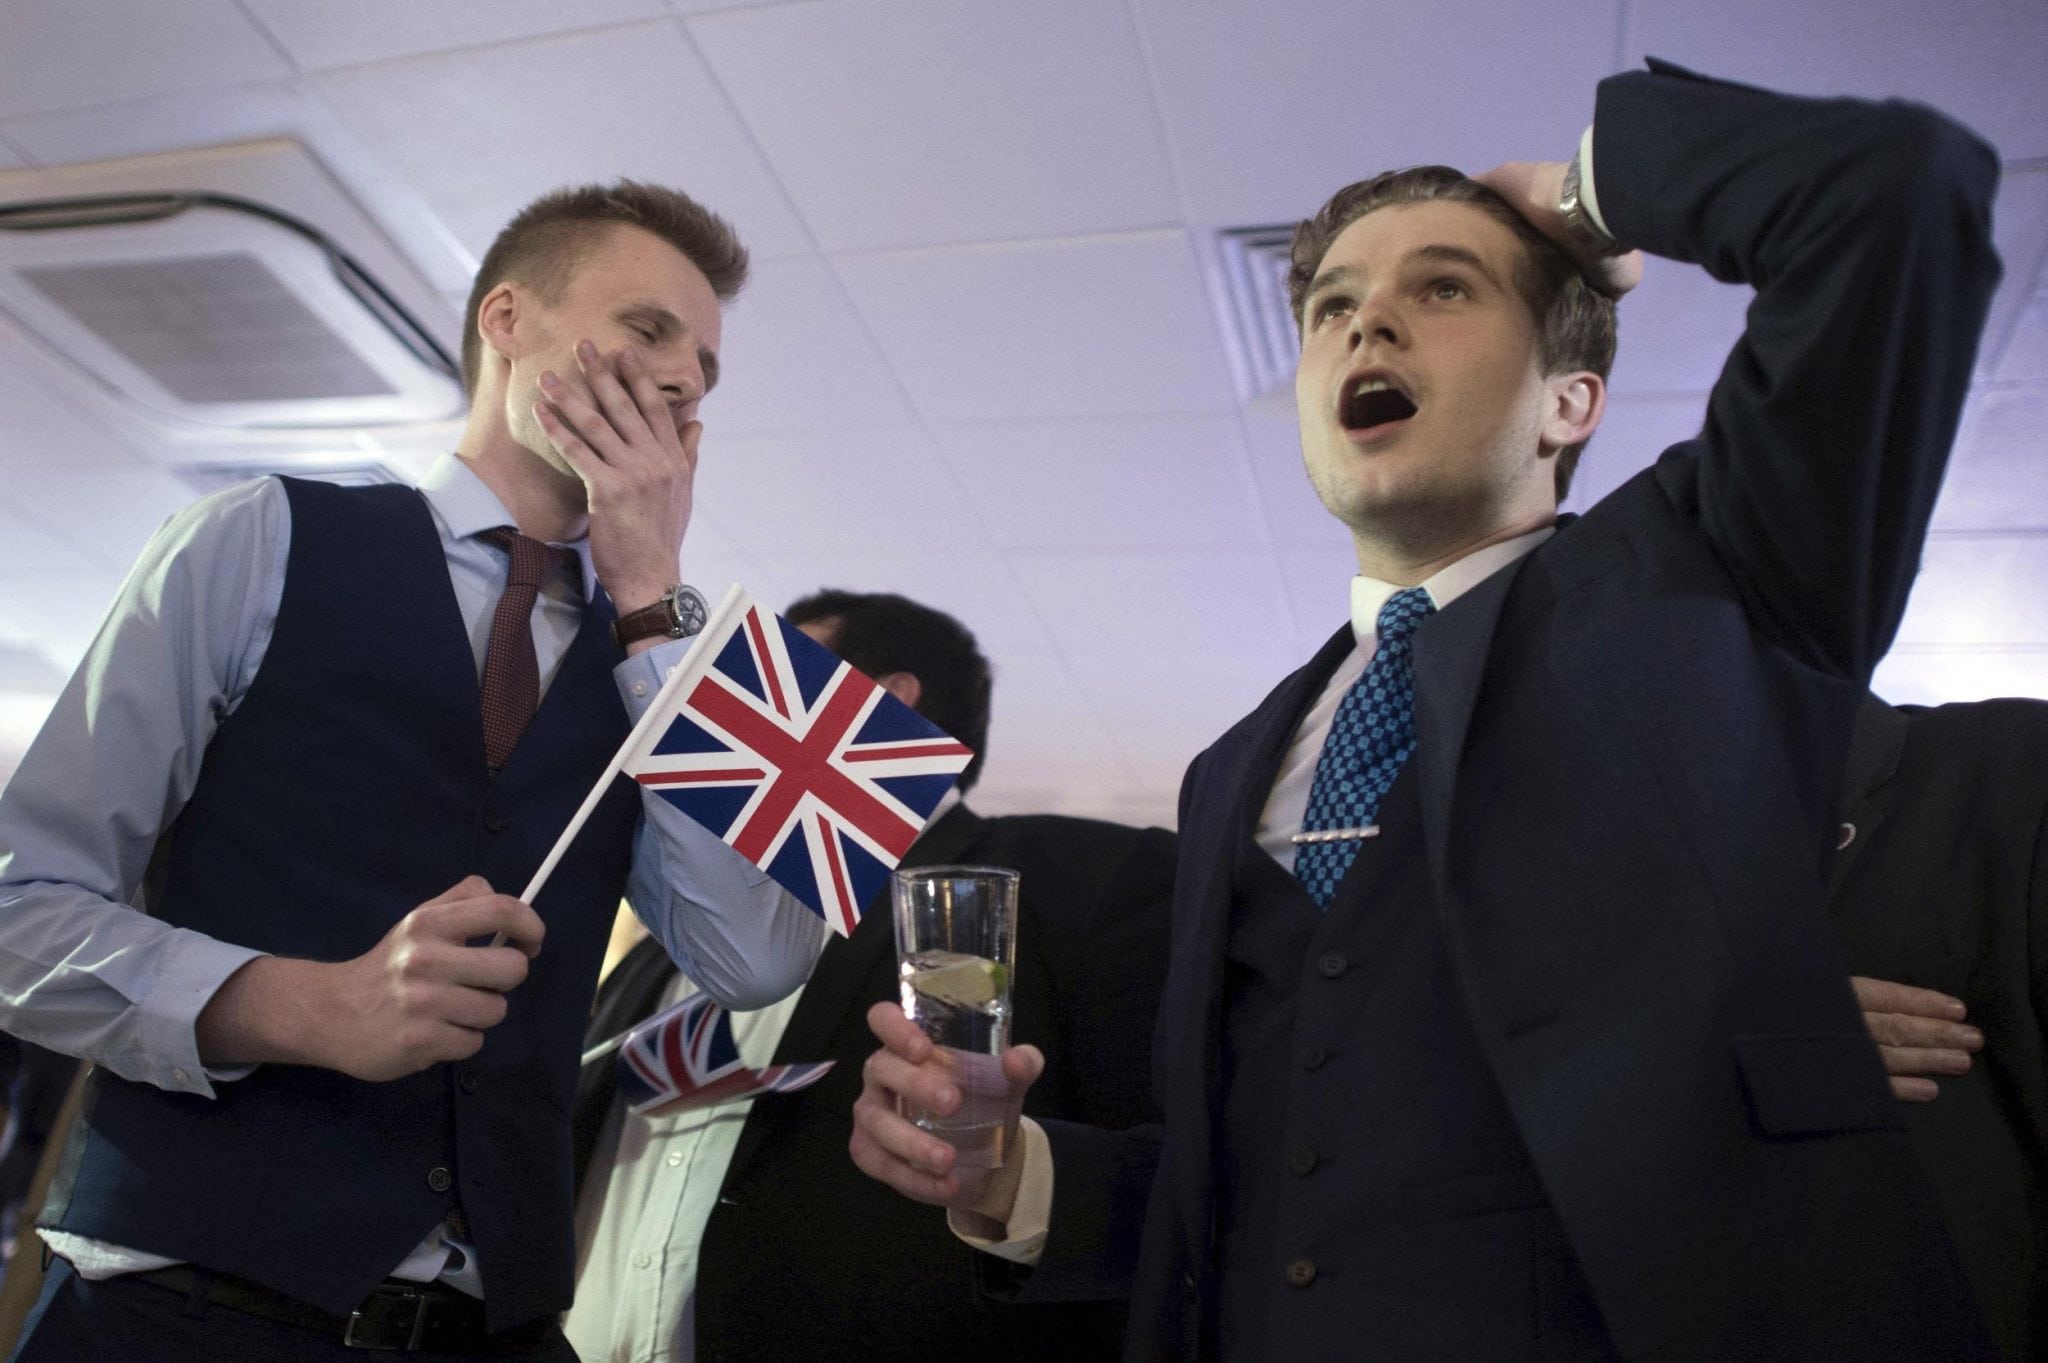 Supporters of leaving the EU celebrate at a party hosted by Leave.EU in central London as they watch results come in from around the country after Thursday's EU referendum, Friday, June 24, 2016. 